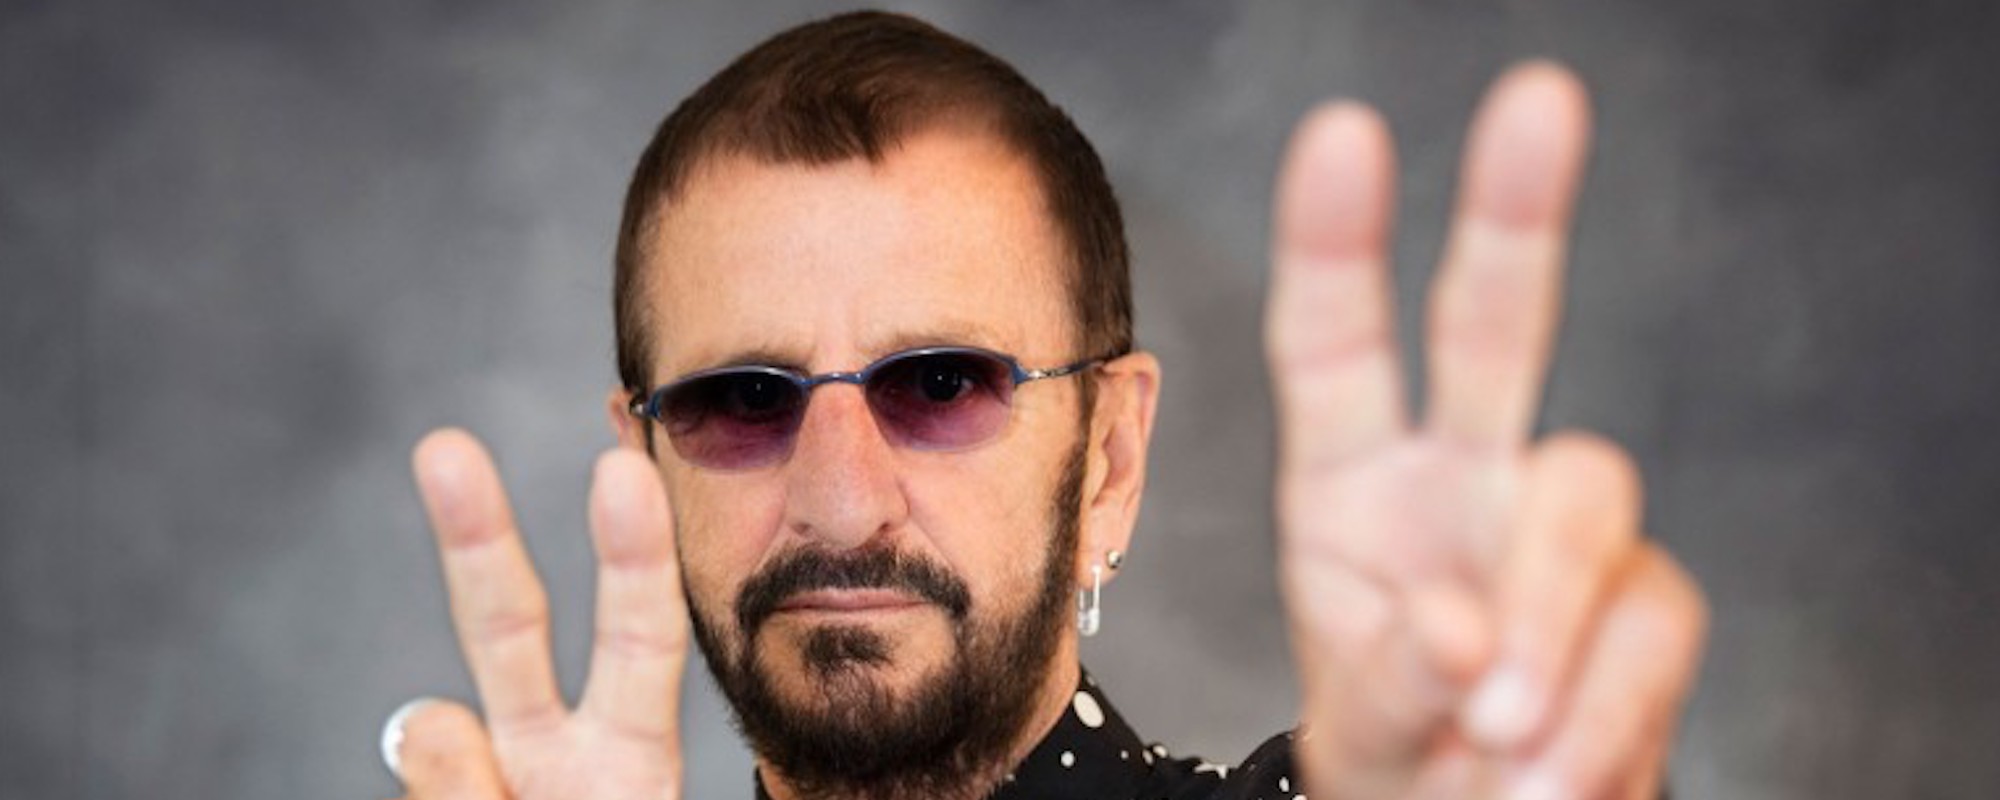 Lost Song “Radhe Shaam,” Featuring Ringo Starr and George Harrison Found in Attic